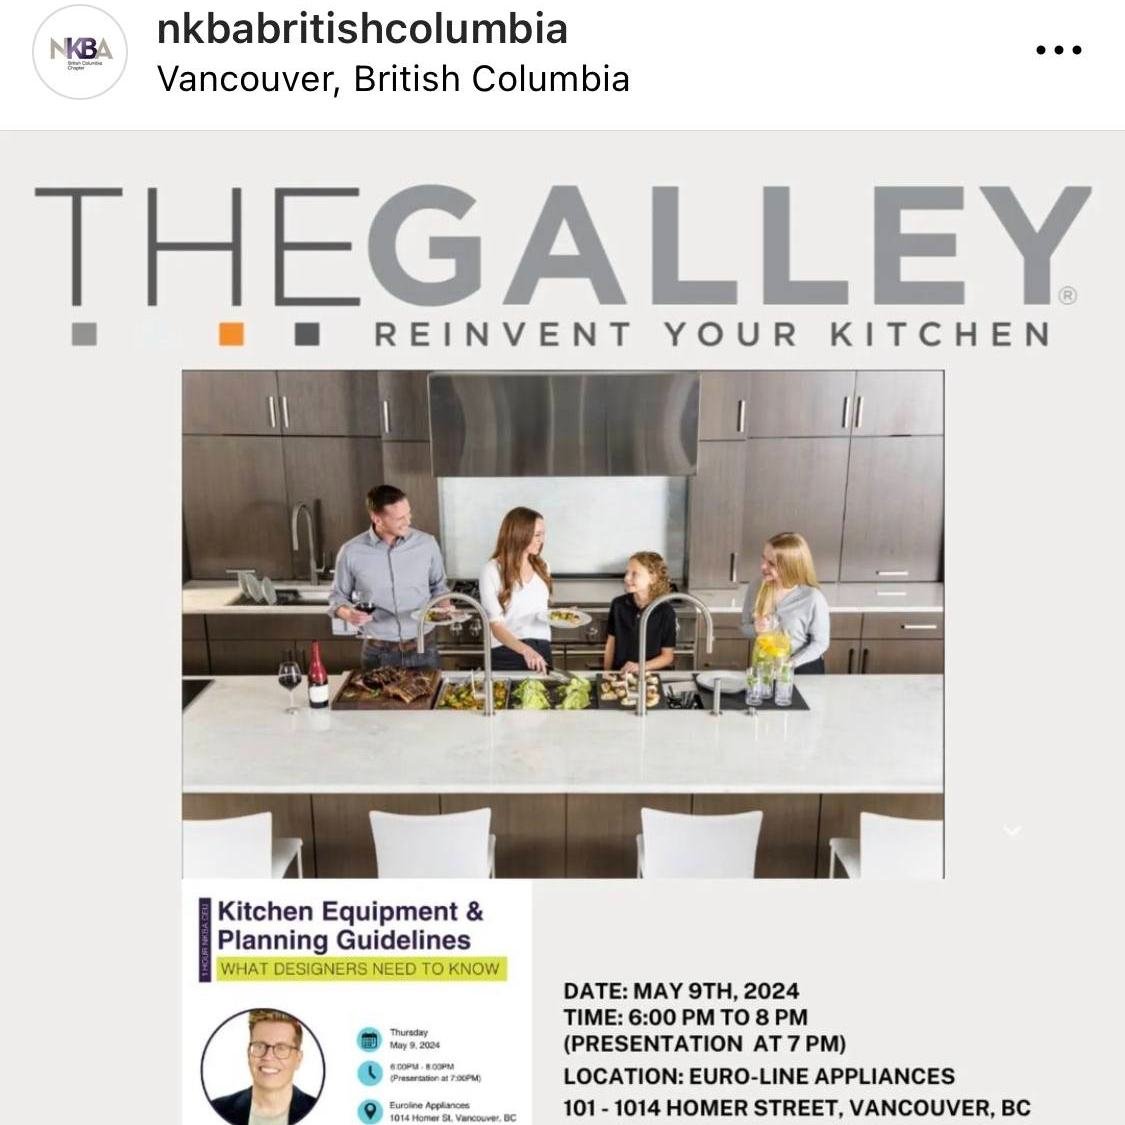 Heads up Vancouver Designer Community
Corey is honoured to be providing his new CEU 

for the British Columbia Chapter of the National Kitchen &amp; Bath Association

Kitchen Equipment &amp; Planning Guidelines
-What designers need to know.

on May 9